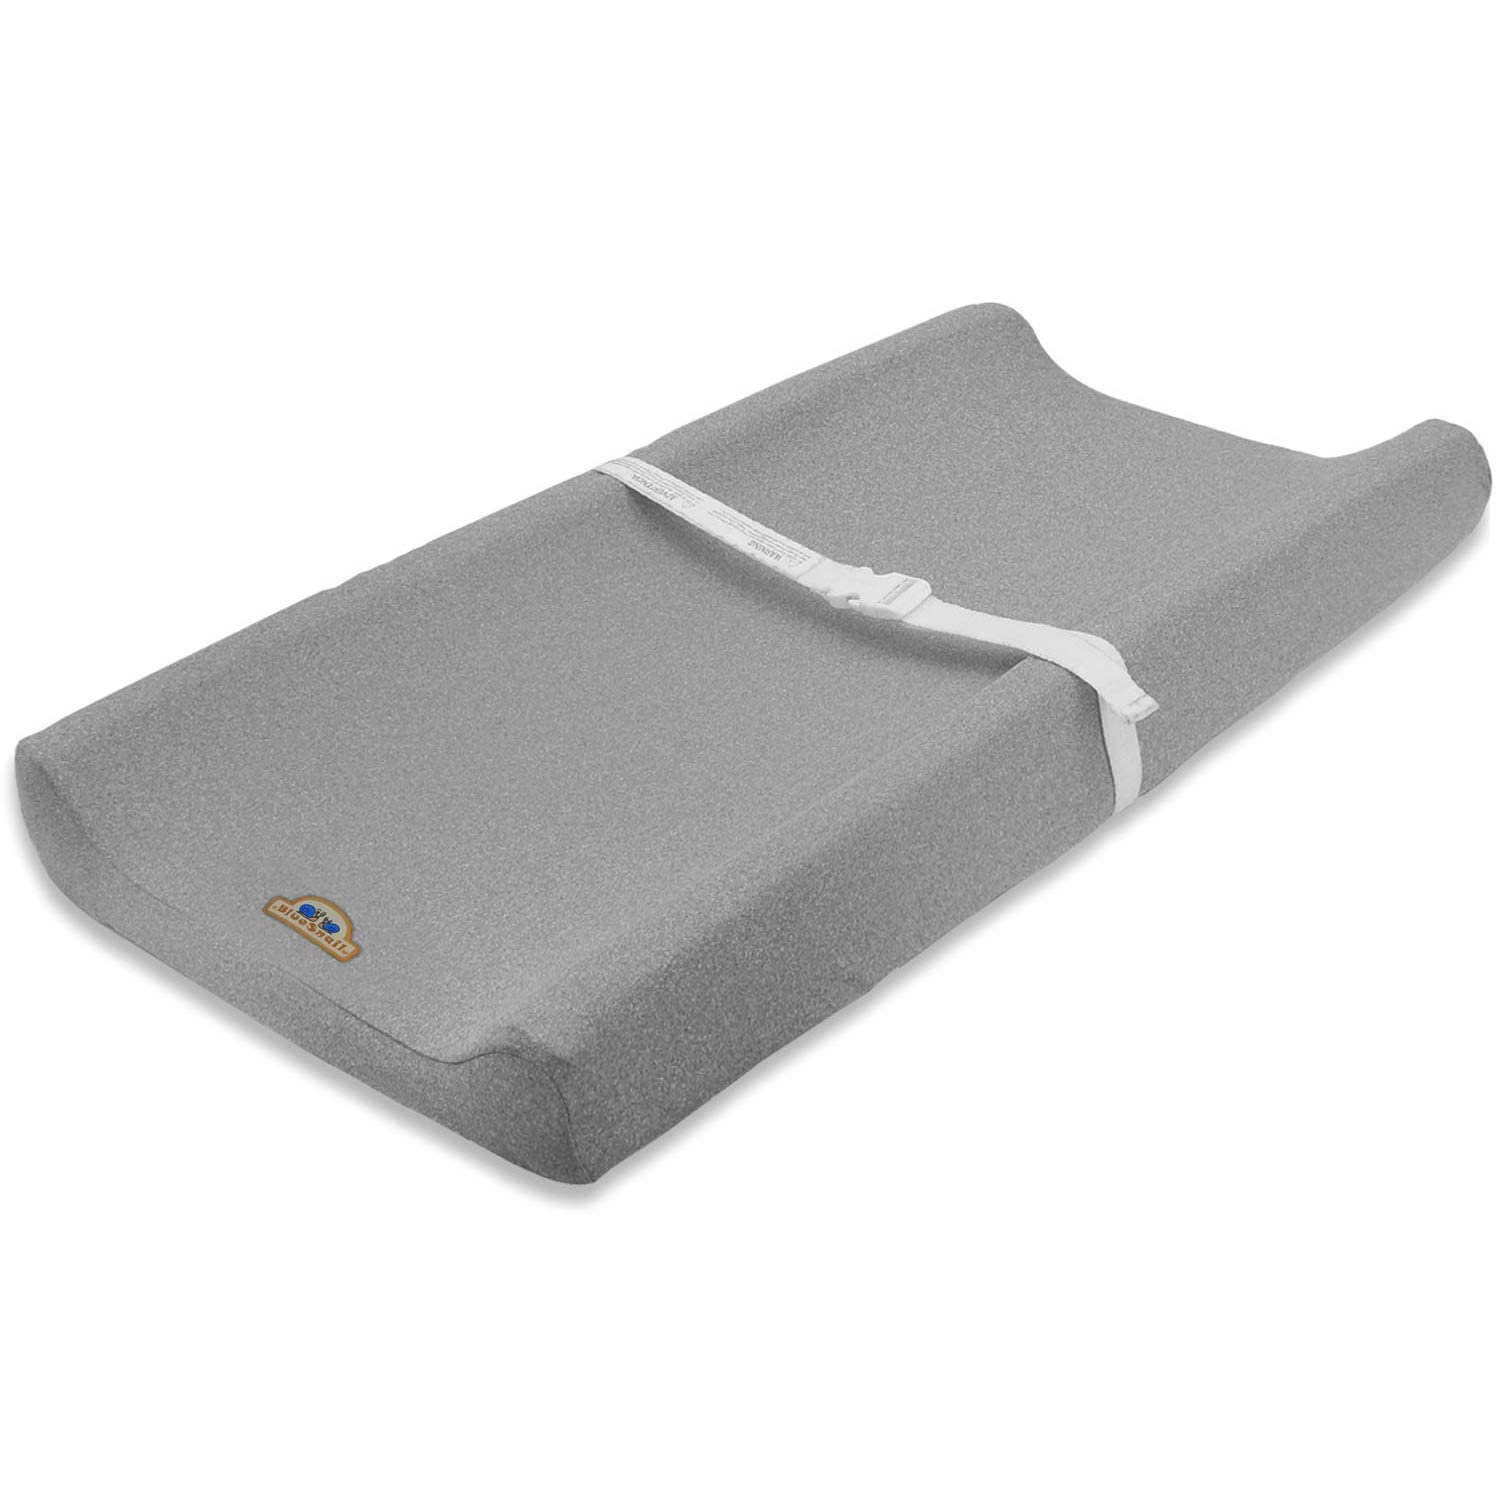 Super Soft and Stretchy Changing Pad Cover 2pk by BlueSnail (Heather Grey)